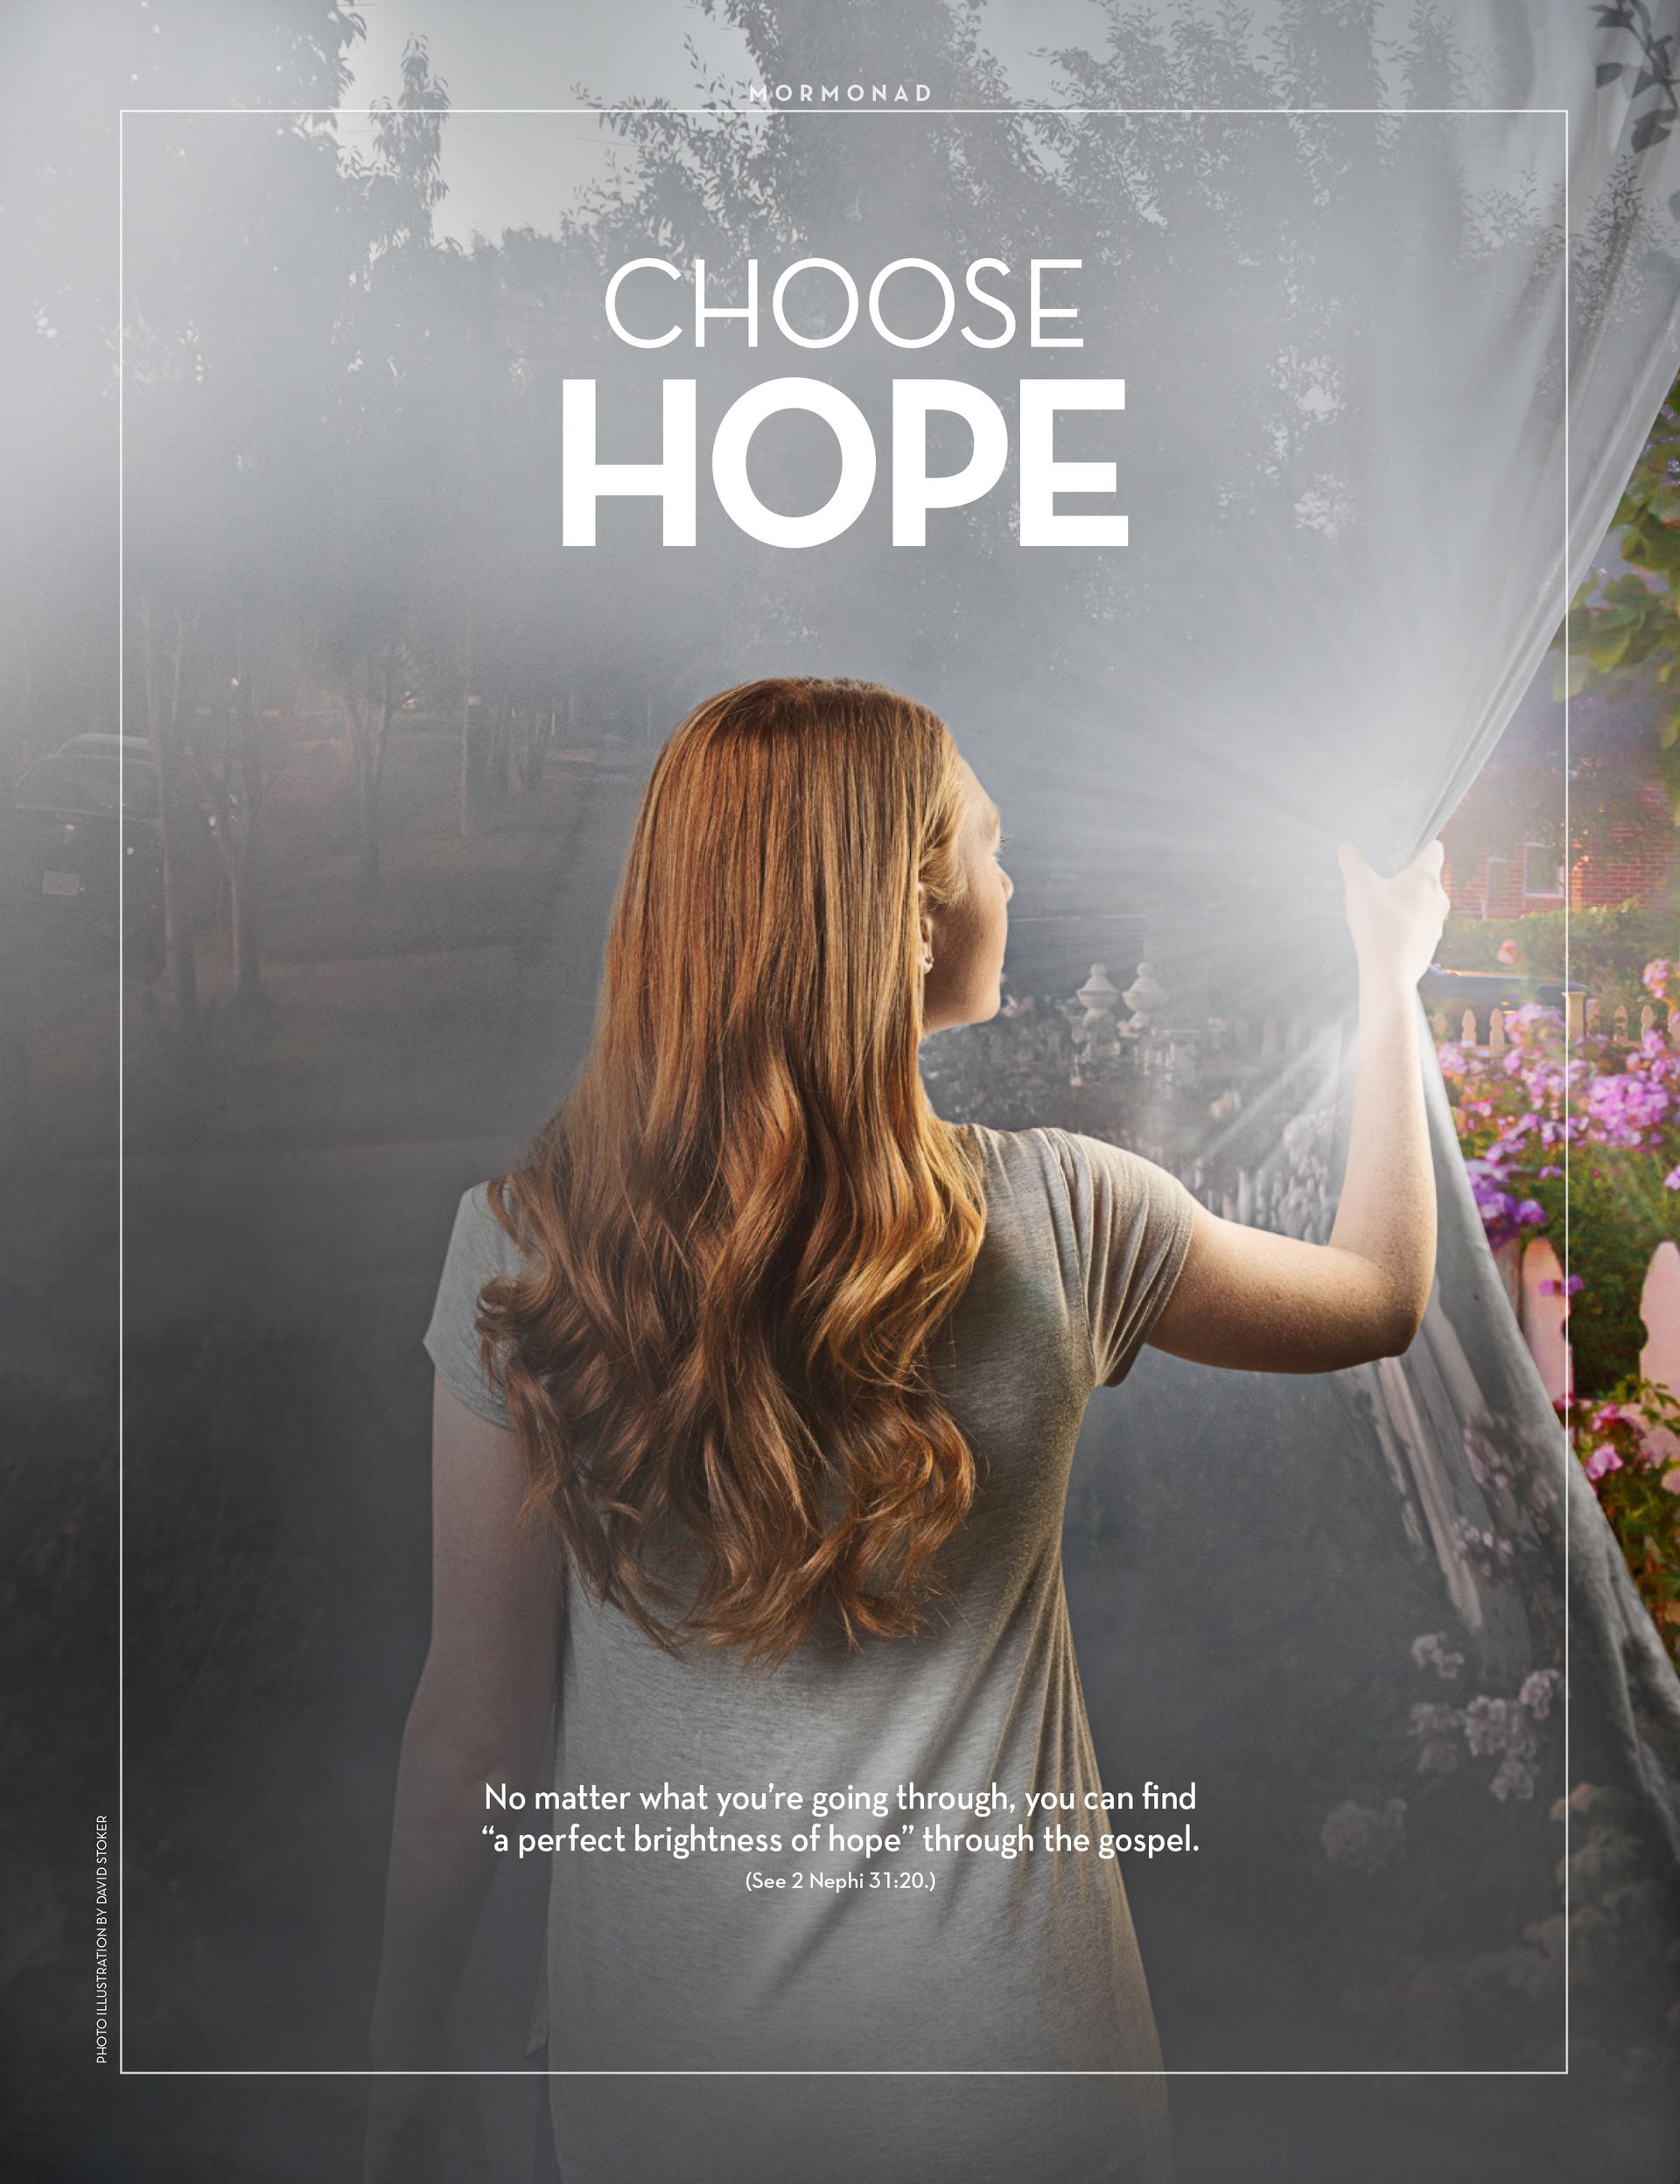 No matter what you’re going through, you can find “a perfect brightness of hope” through the gospel. (See 2 Nephi 31:20.) © undefined ipCode 1.